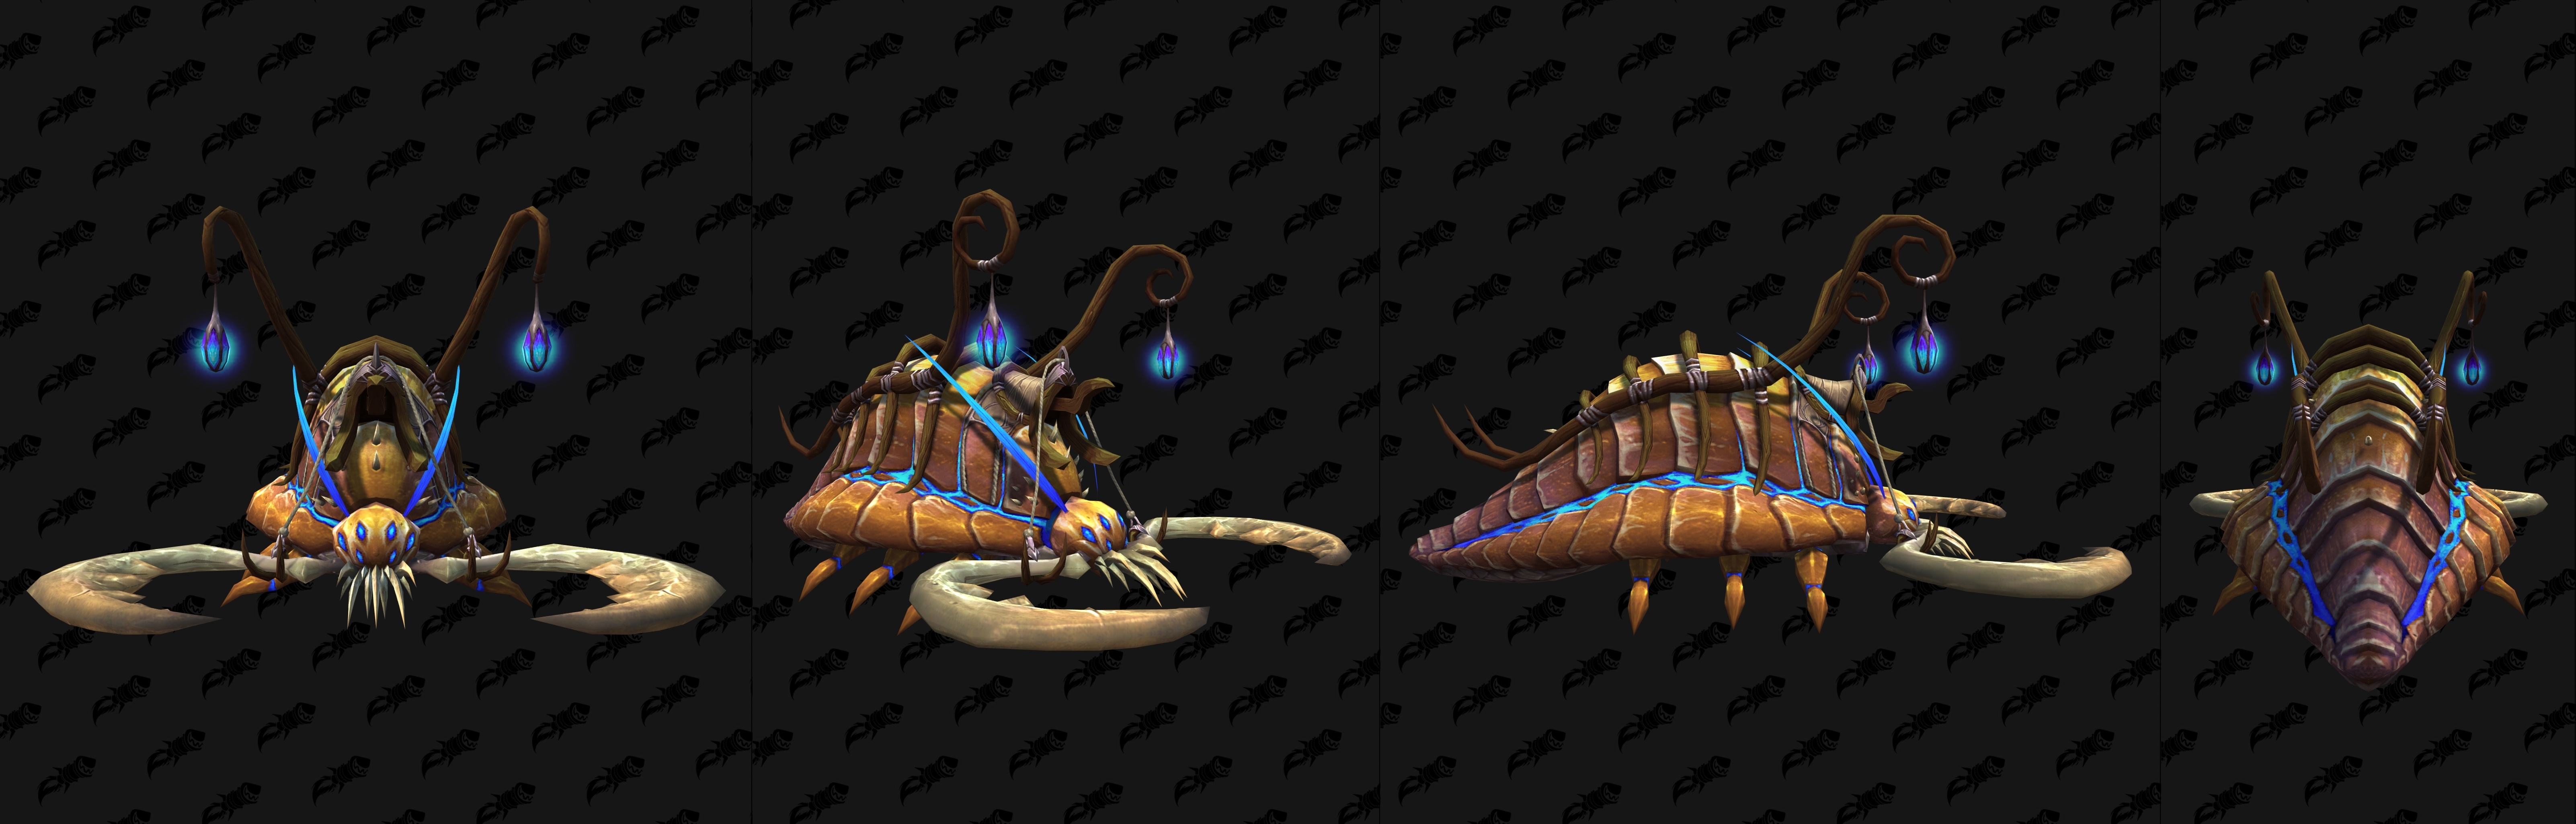 More Easy to Obtain Mounts in Shadowlands - Spinemaw Gladechewer,  Silverwind Larion, Blanchy's Reins - Wowhead News